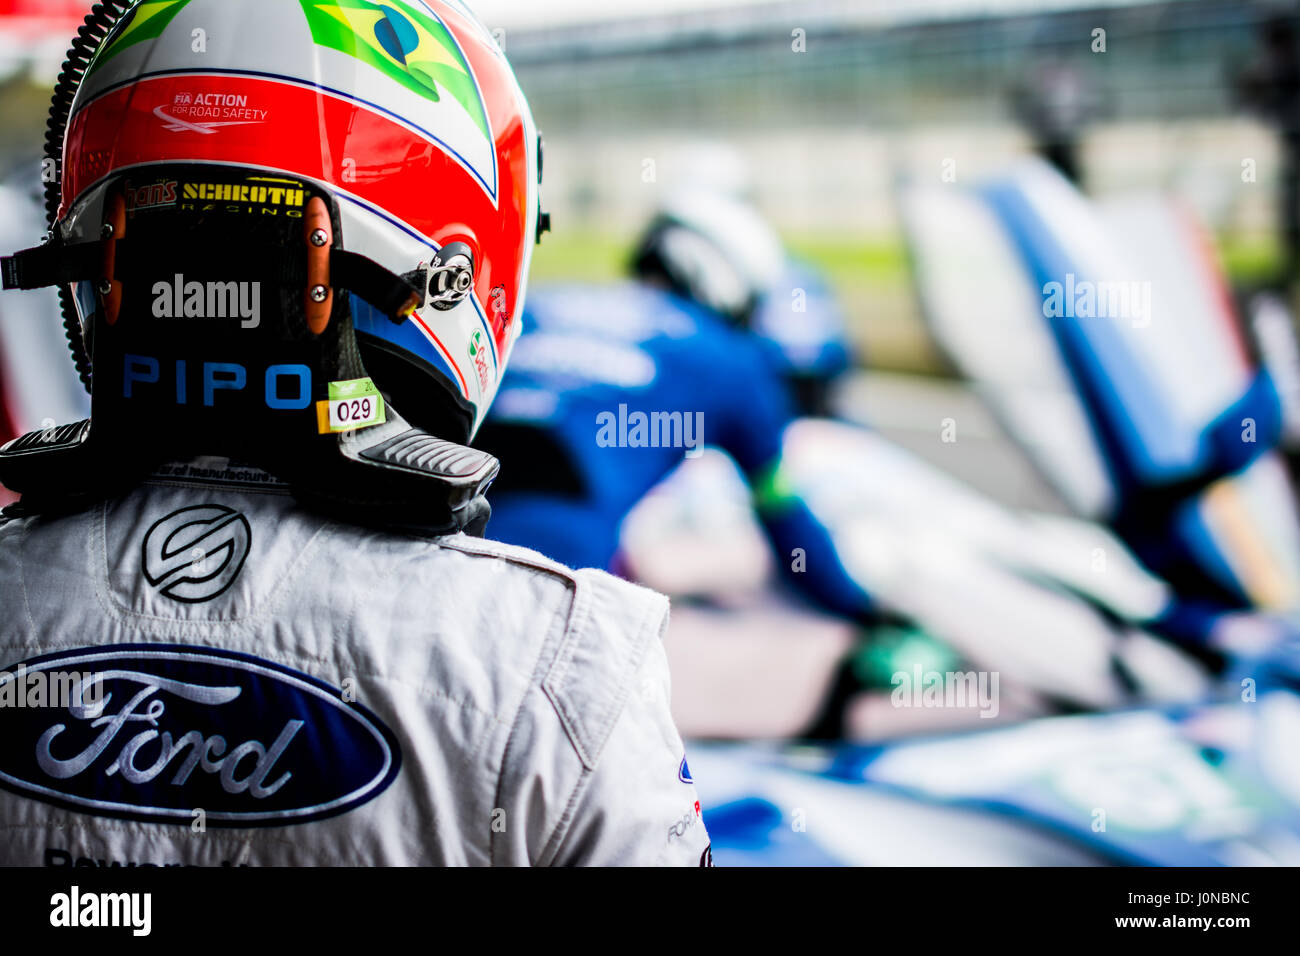 Towcester, Northamptonshire, UK. 15th April, 2017. FIA WEC racing driver Luis Felipe Derani (BRA) and Ford Chip Ganassi Team UK during practice session for the 6 Hours of Silverstone of the FIA World Endurance Championship at Silverstone Circuit (Photo by Gergo Toth / Alamy Live News) Stock Photo